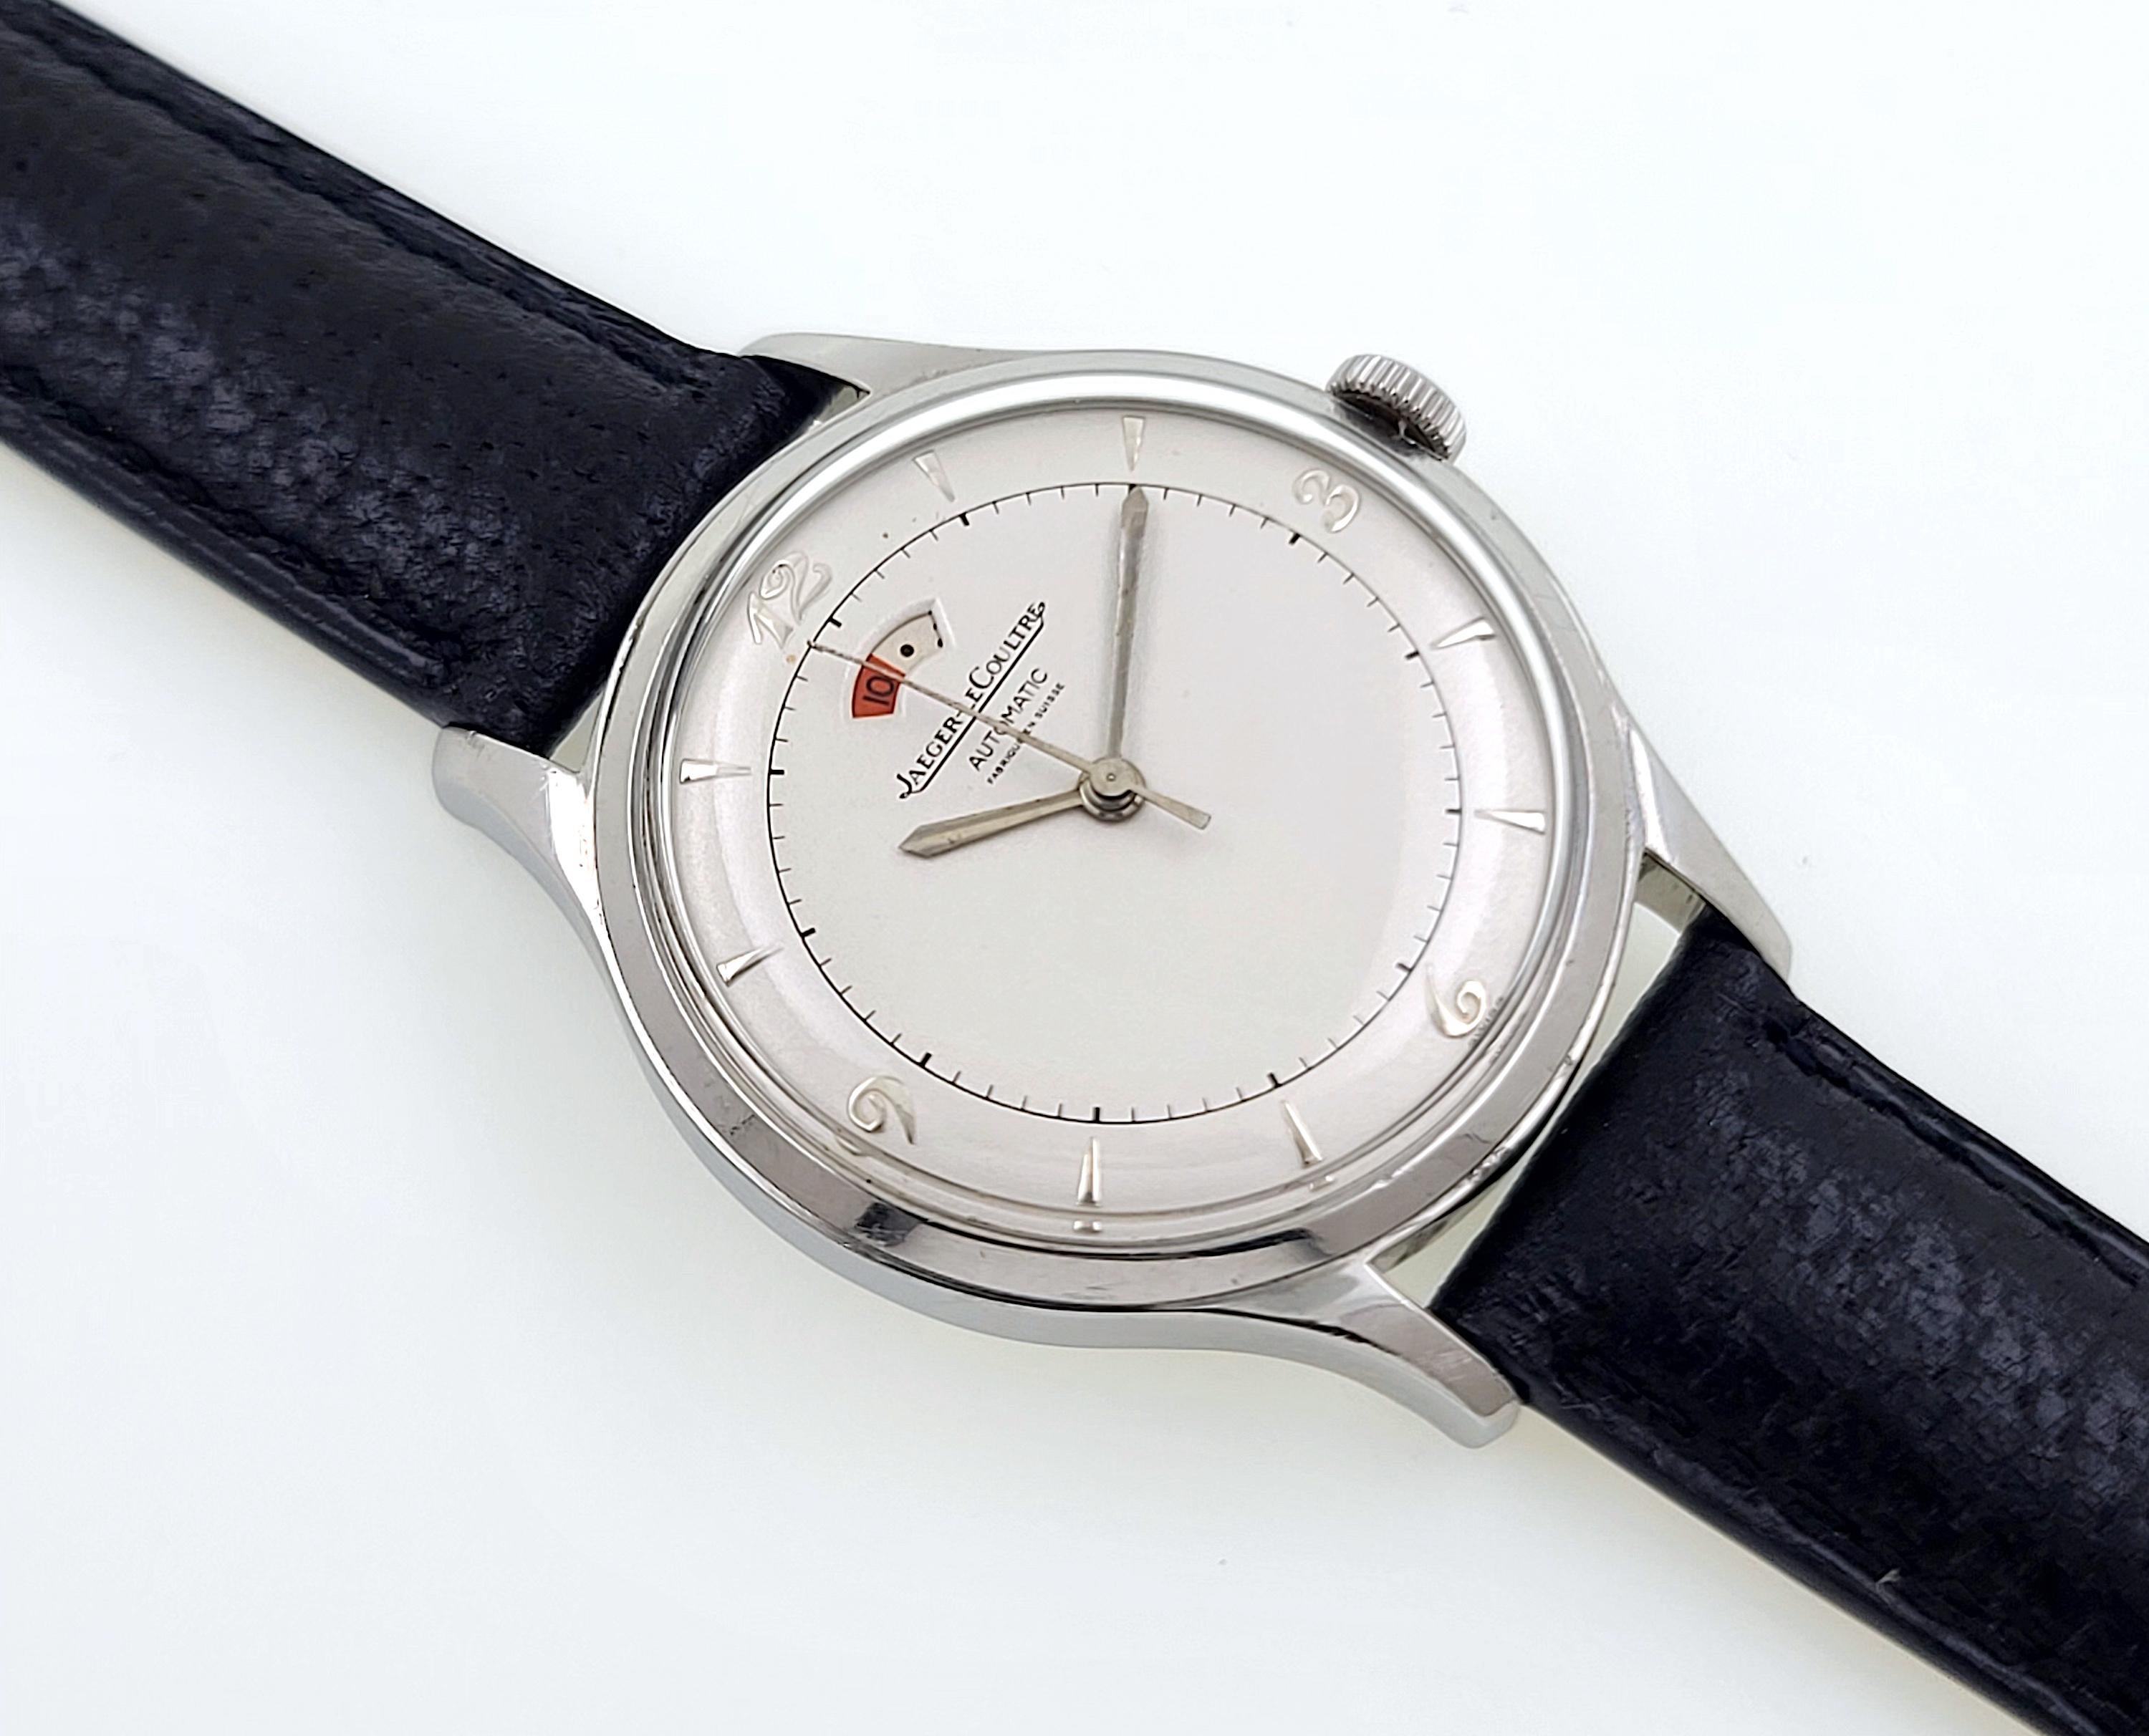 Jaeger-LeCoultre
Founded in 1833

Jaeger-LeCoultre has always produced a great many movements for a number of famous watch houses including Vacheron Constantin, Audemars Piguet, IWC, and Cartier. Indeed for most of the 20th Century, Jaeger-LeCoultre